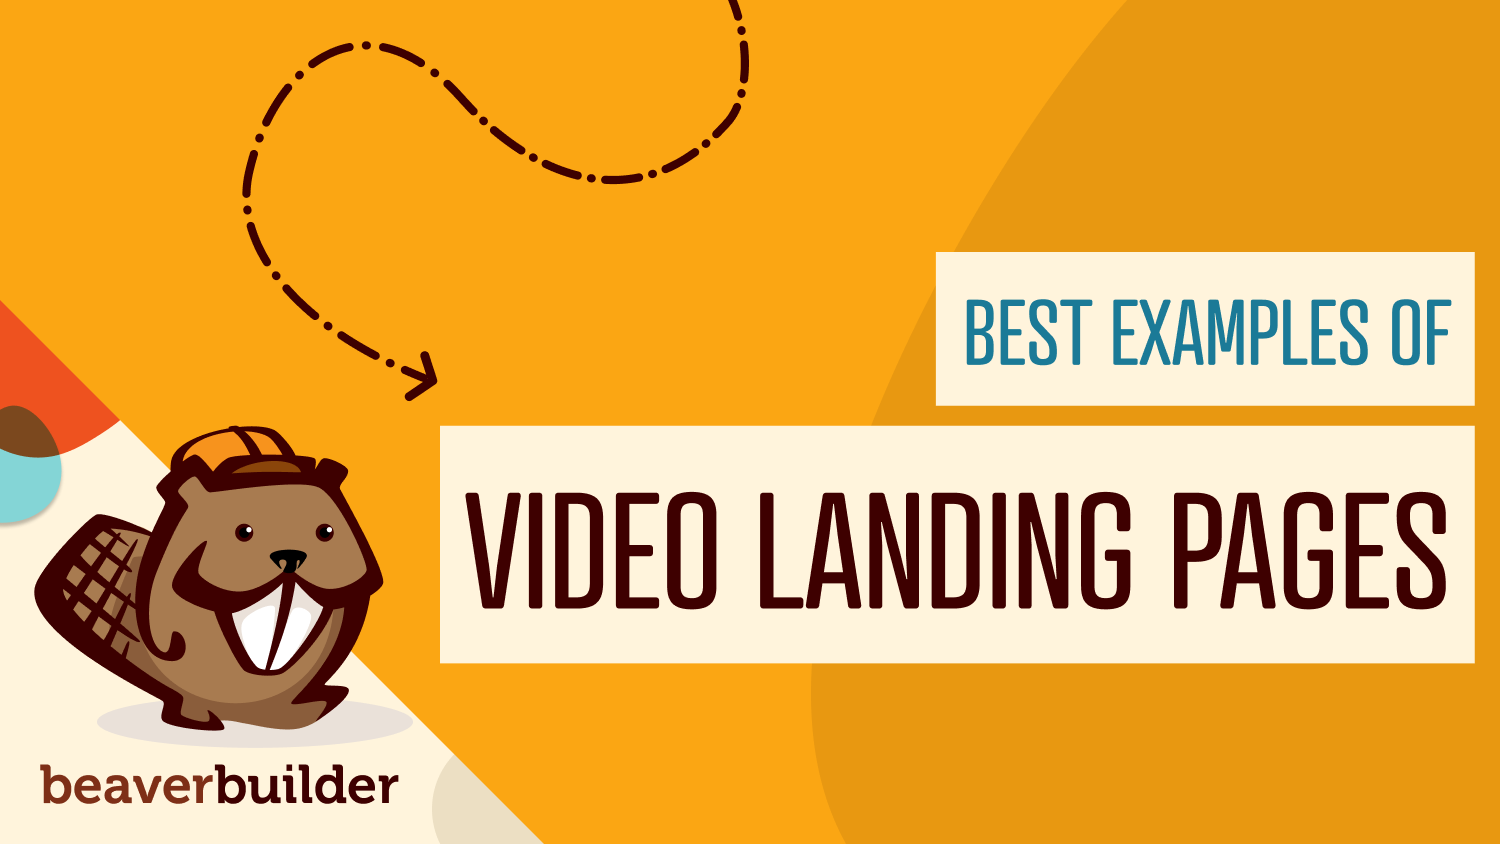 Best Examples of Video Landing Pages